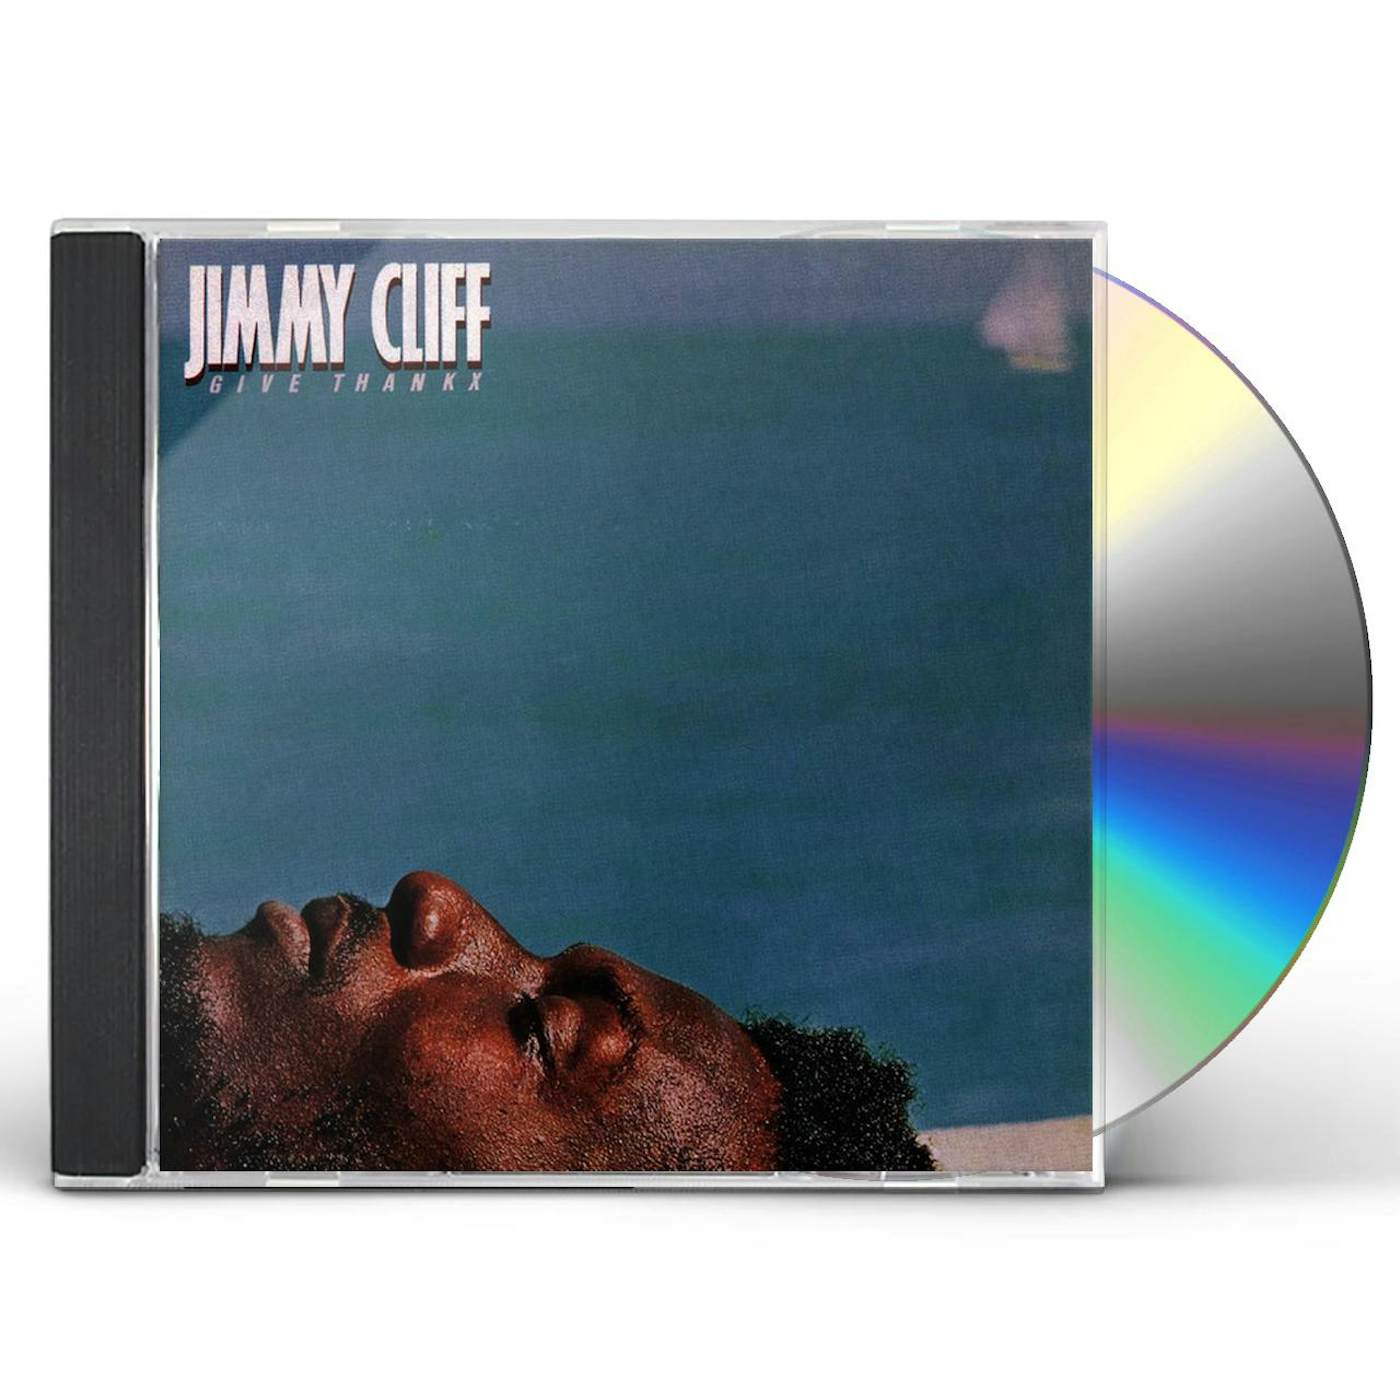 Jimmy Cliff GIVE THANX CD